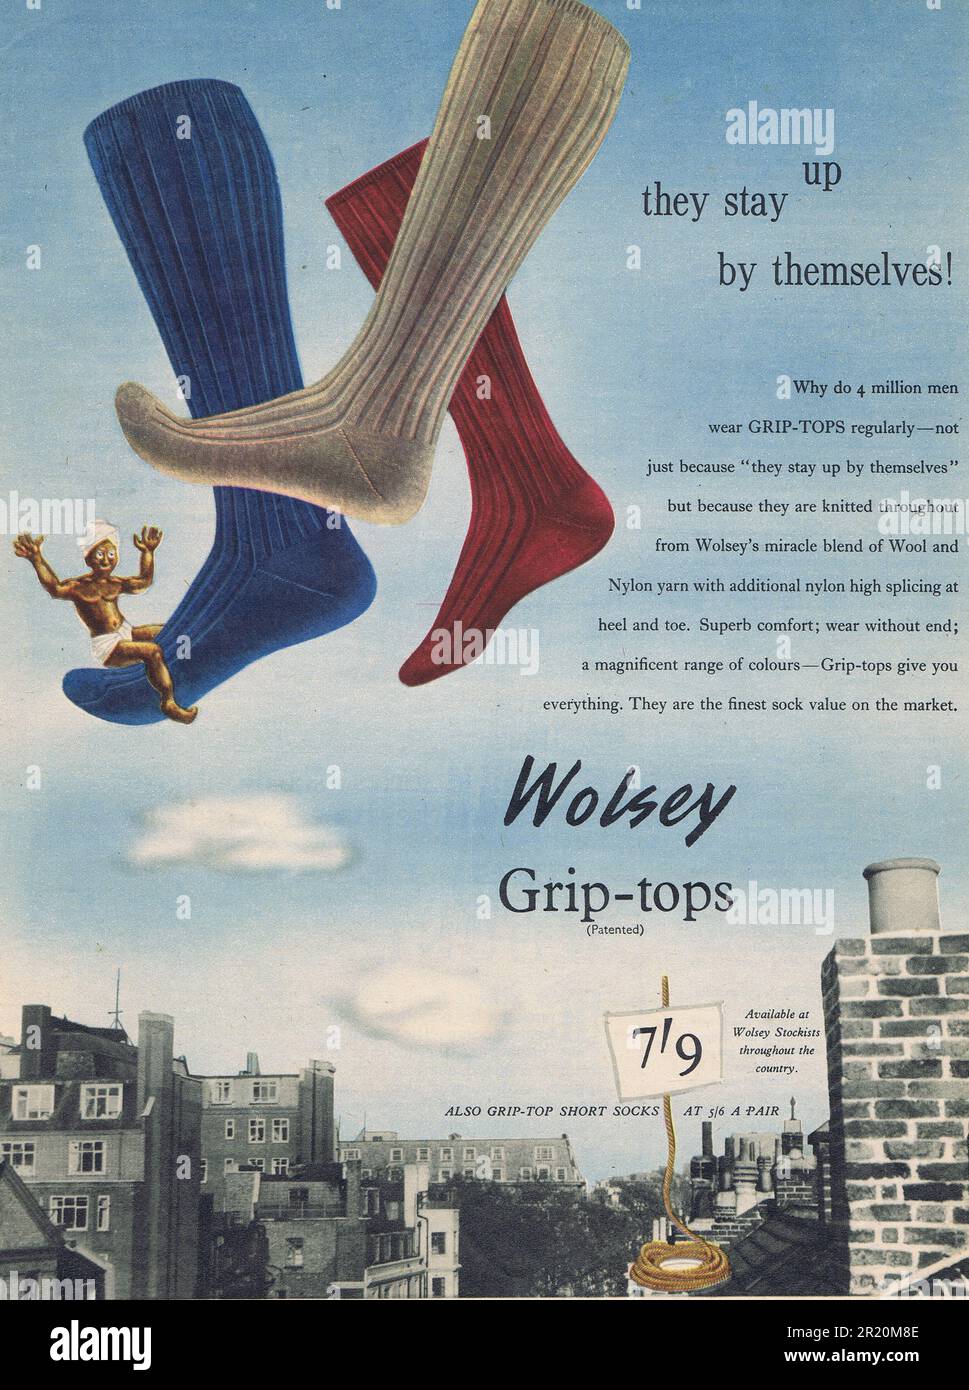 Wolsey Socks Ad c1955 Photograph by Hector Archive Stock Photo